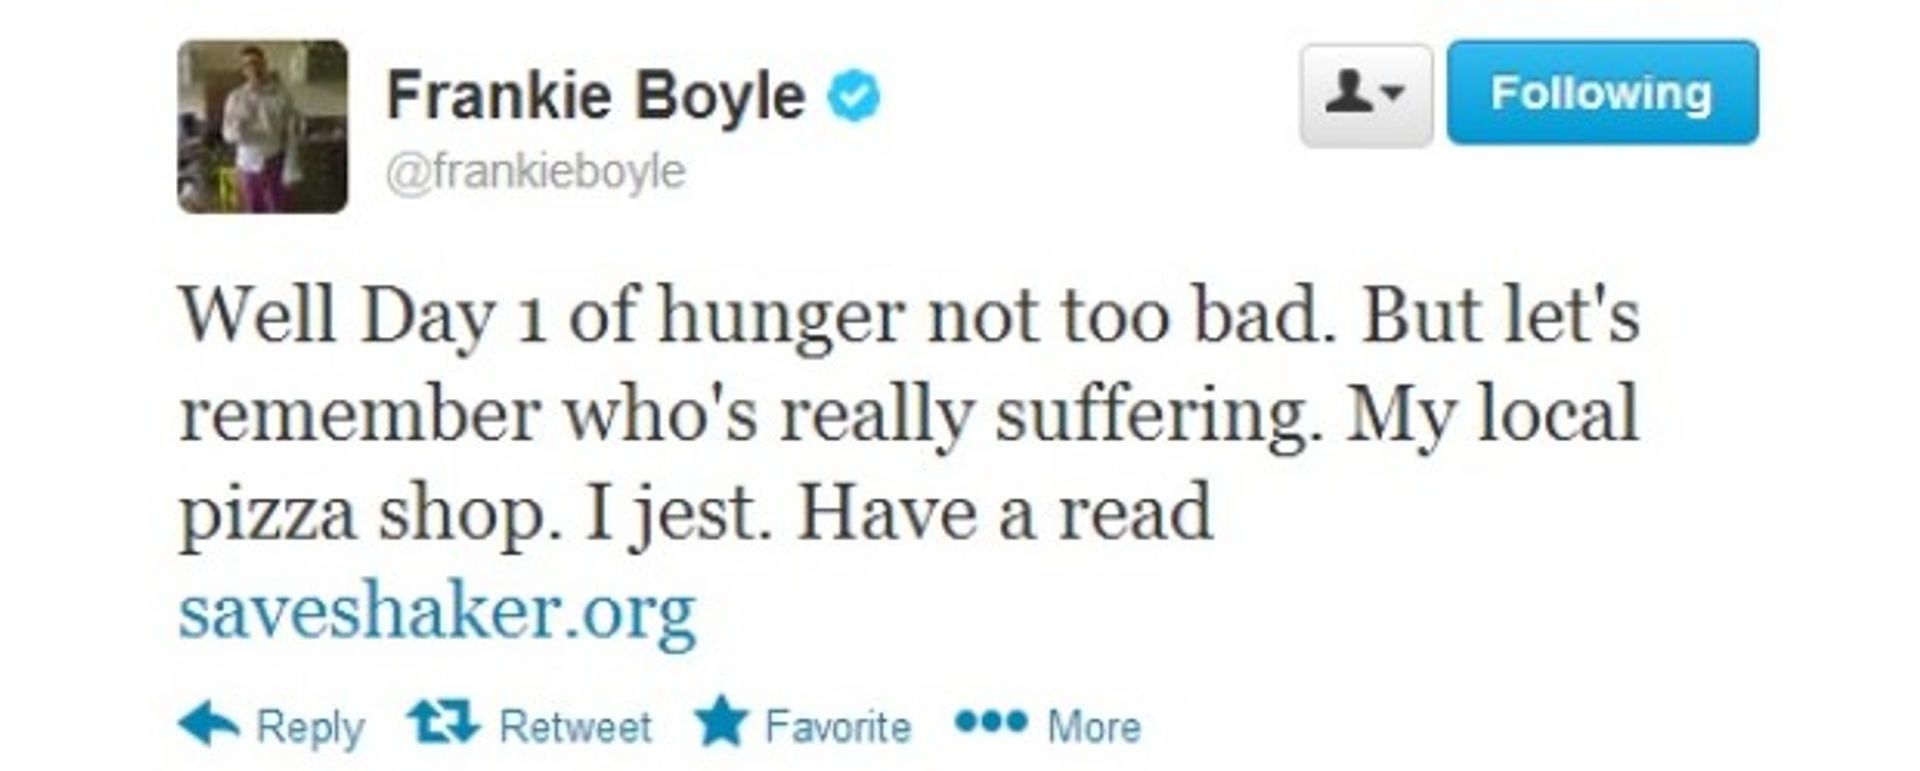 Twitter___frankieboyle__Well_Day_1_of_hunger_not_too_...